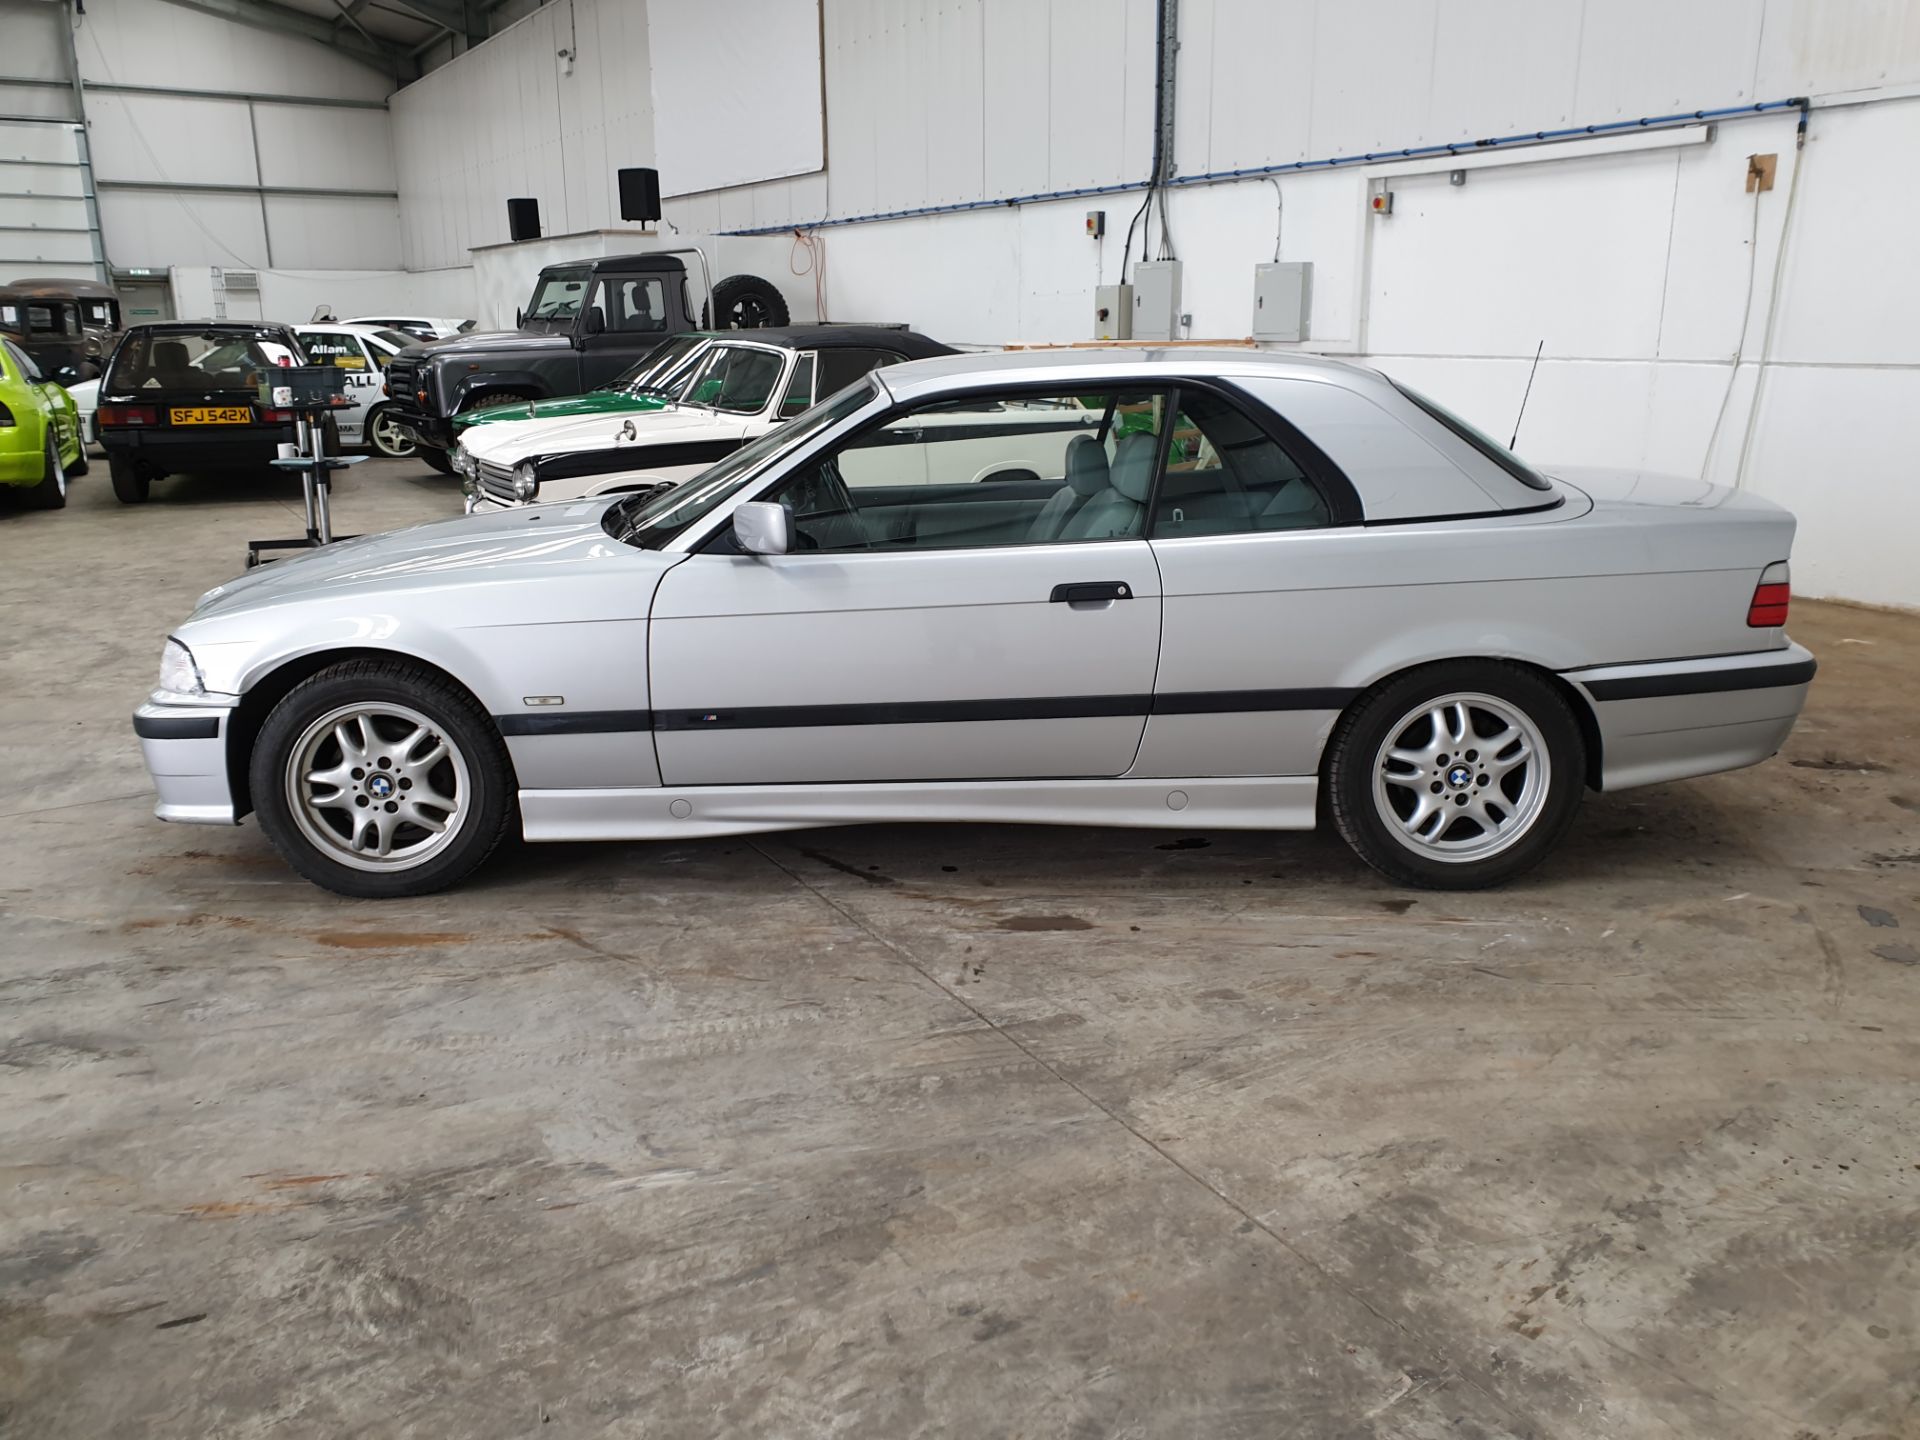 BMW 323 Convertible - Image 6 of 13